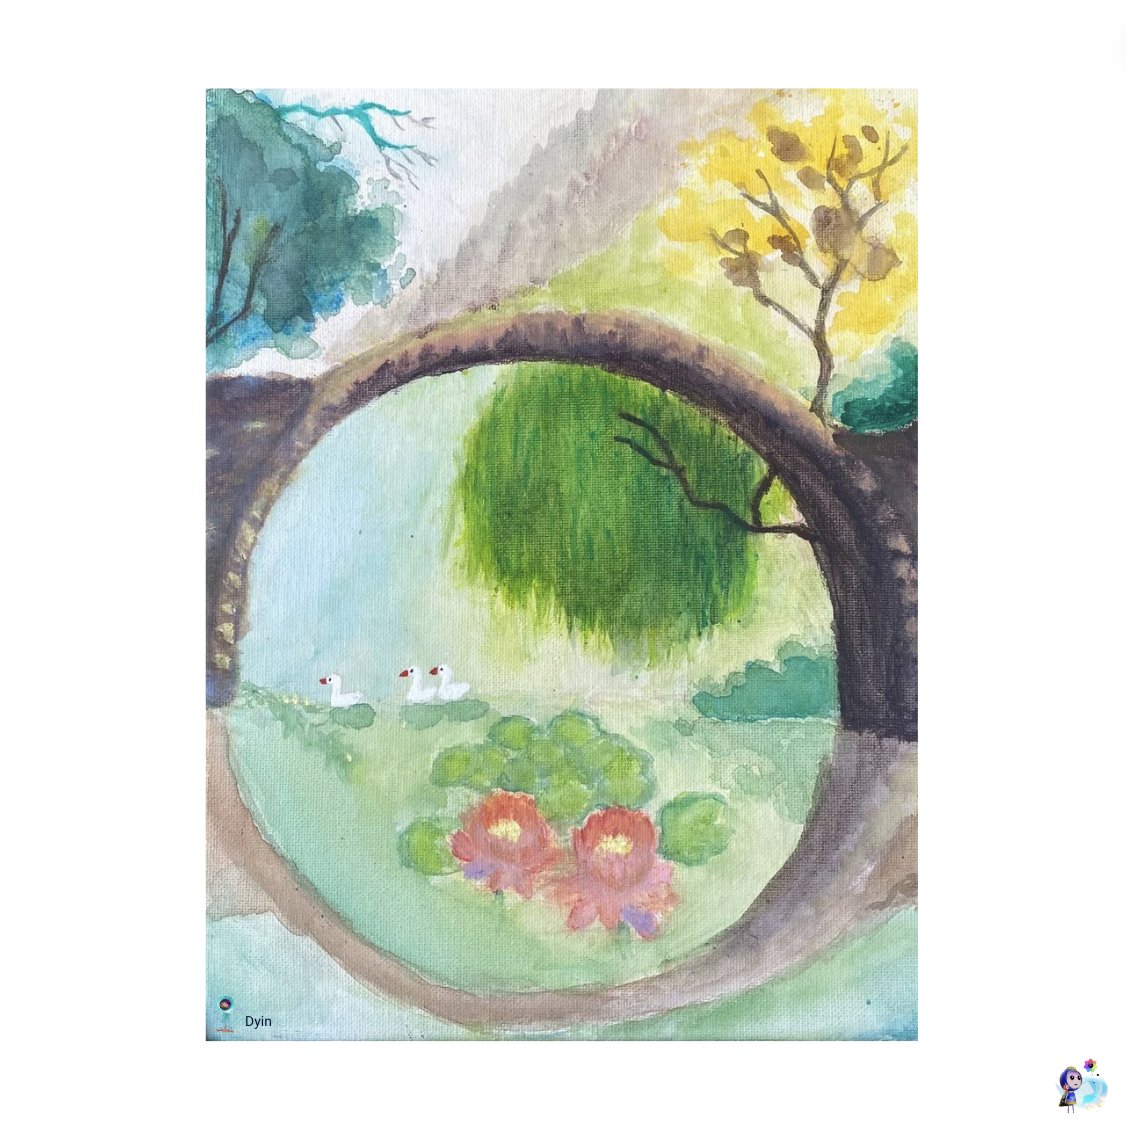 Original water-colour based artworks by Jenny and Dyin inspired by Chinese landscape artworks⛰️🎨. How pretty and mystical are they🥰?

#artstudio #creativearts #imagination #artwork #childrensart #childrensartwork #chineseculture #watercolour #watercolourart #landscapeart